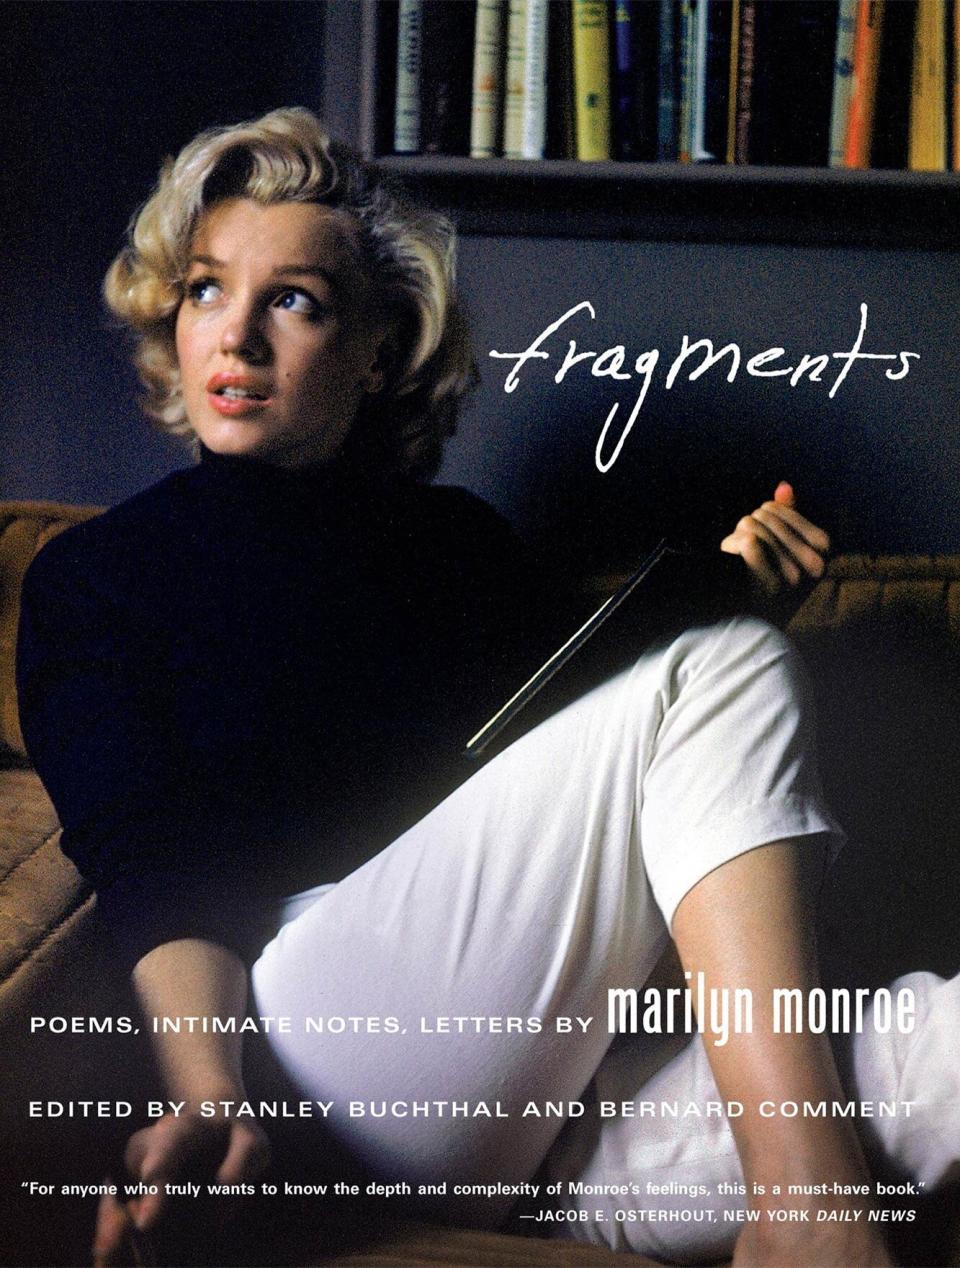 Fragments: Poems, Intimate Notes, Letters Paperback – Illustrated, October 16, 2012 by Marilyn Monroe (Author), Bernard Comment